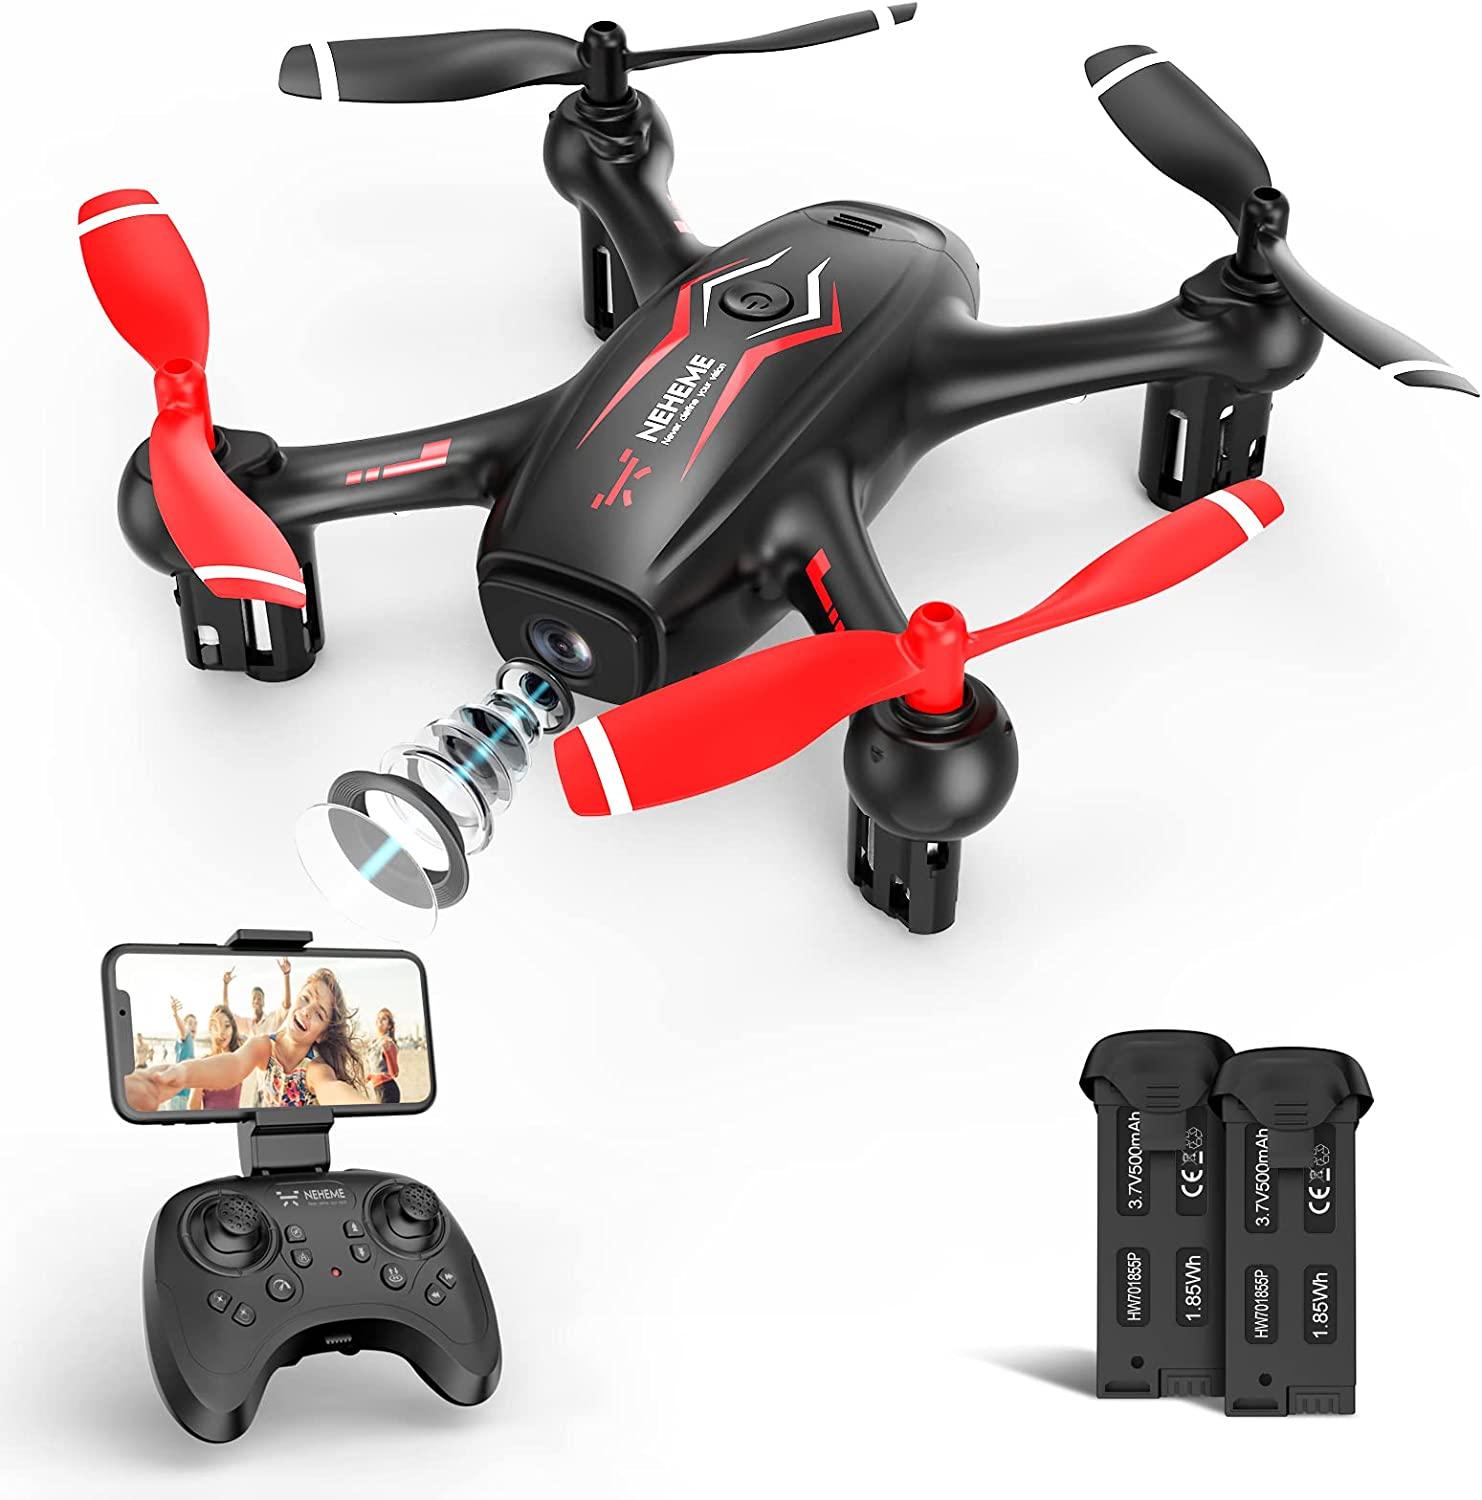  NEHEME Drones with Camera for Adults, NH760 1080P FPV Drone for  Kids Beginners, Foldable WIFI RC Quadcopter with 2 Batteries for 32 Min  Flight, Carrying Case, Altitude Hold, Toys Gifts for